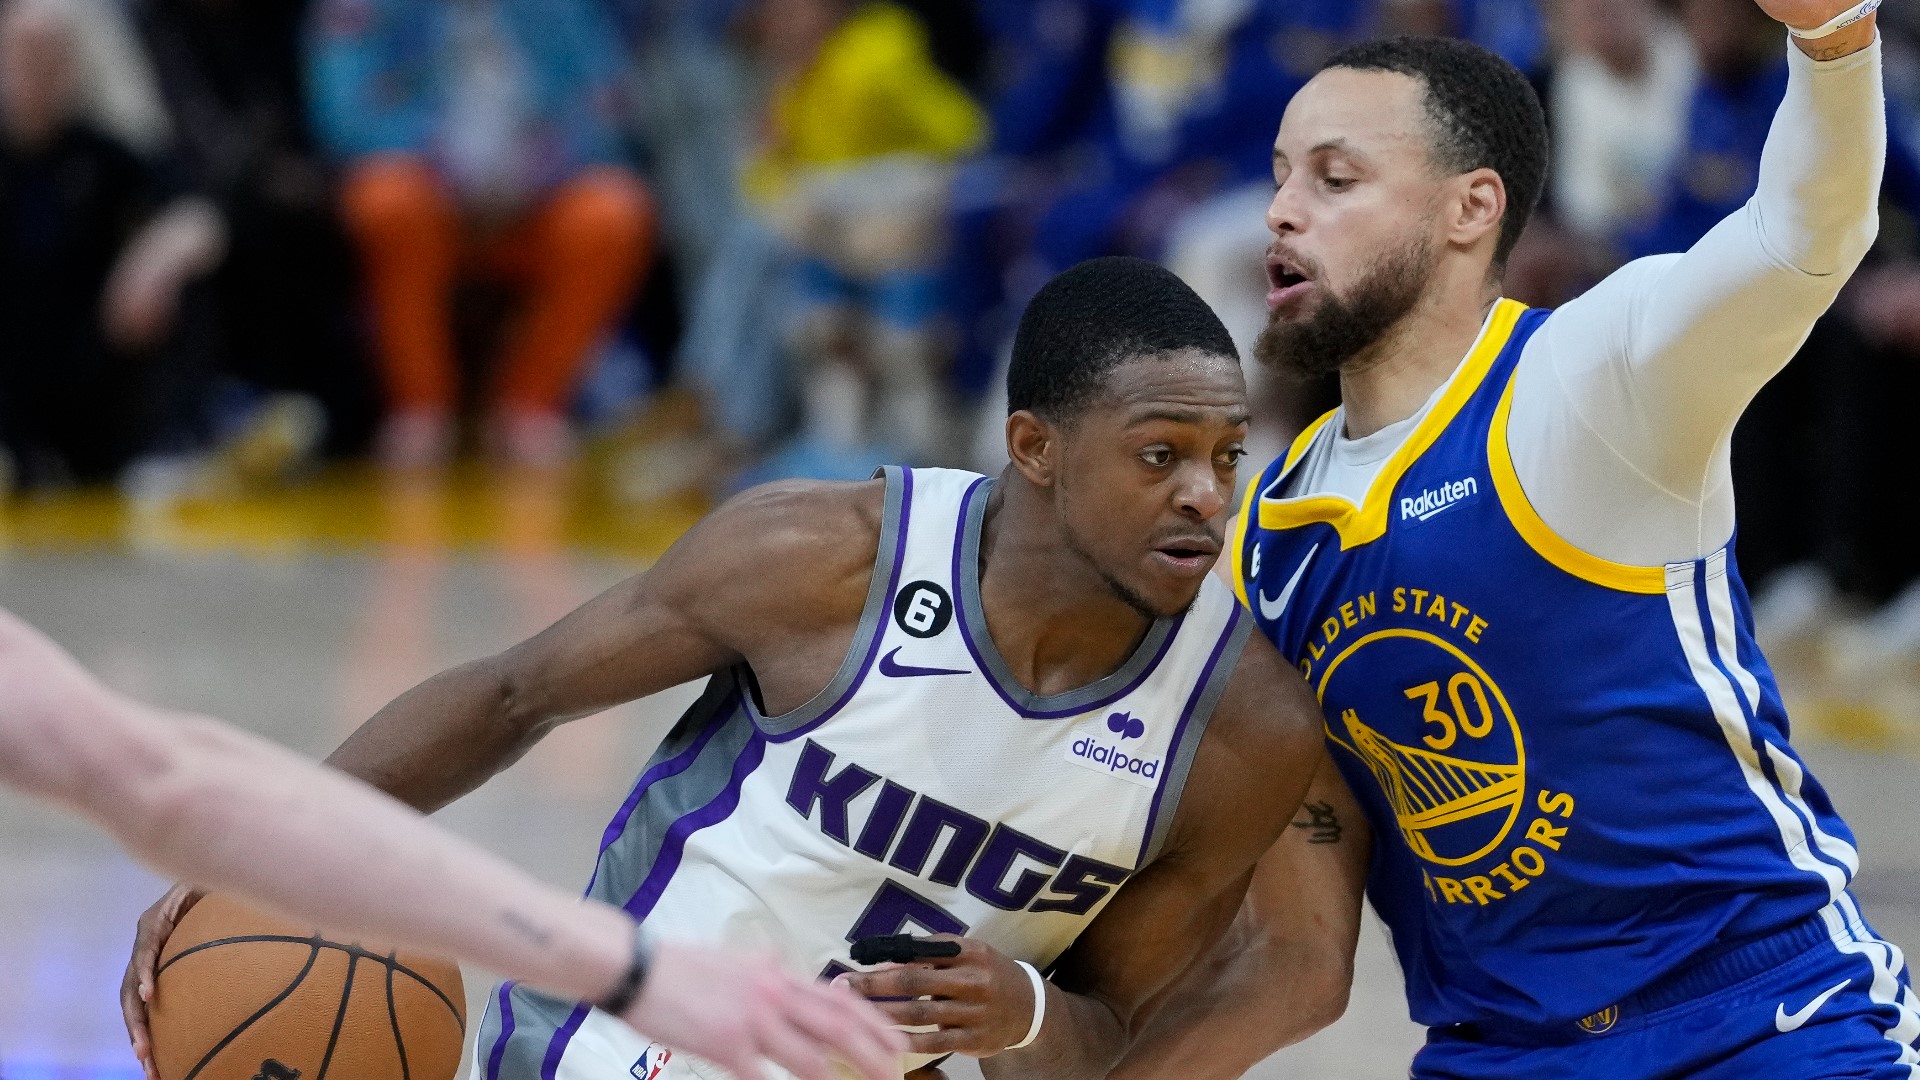 After beating the Golden State Warriors and tying up the NBA Playoff series 3-3, De"Aaron Fox told reporters the game was the best they've played all year.